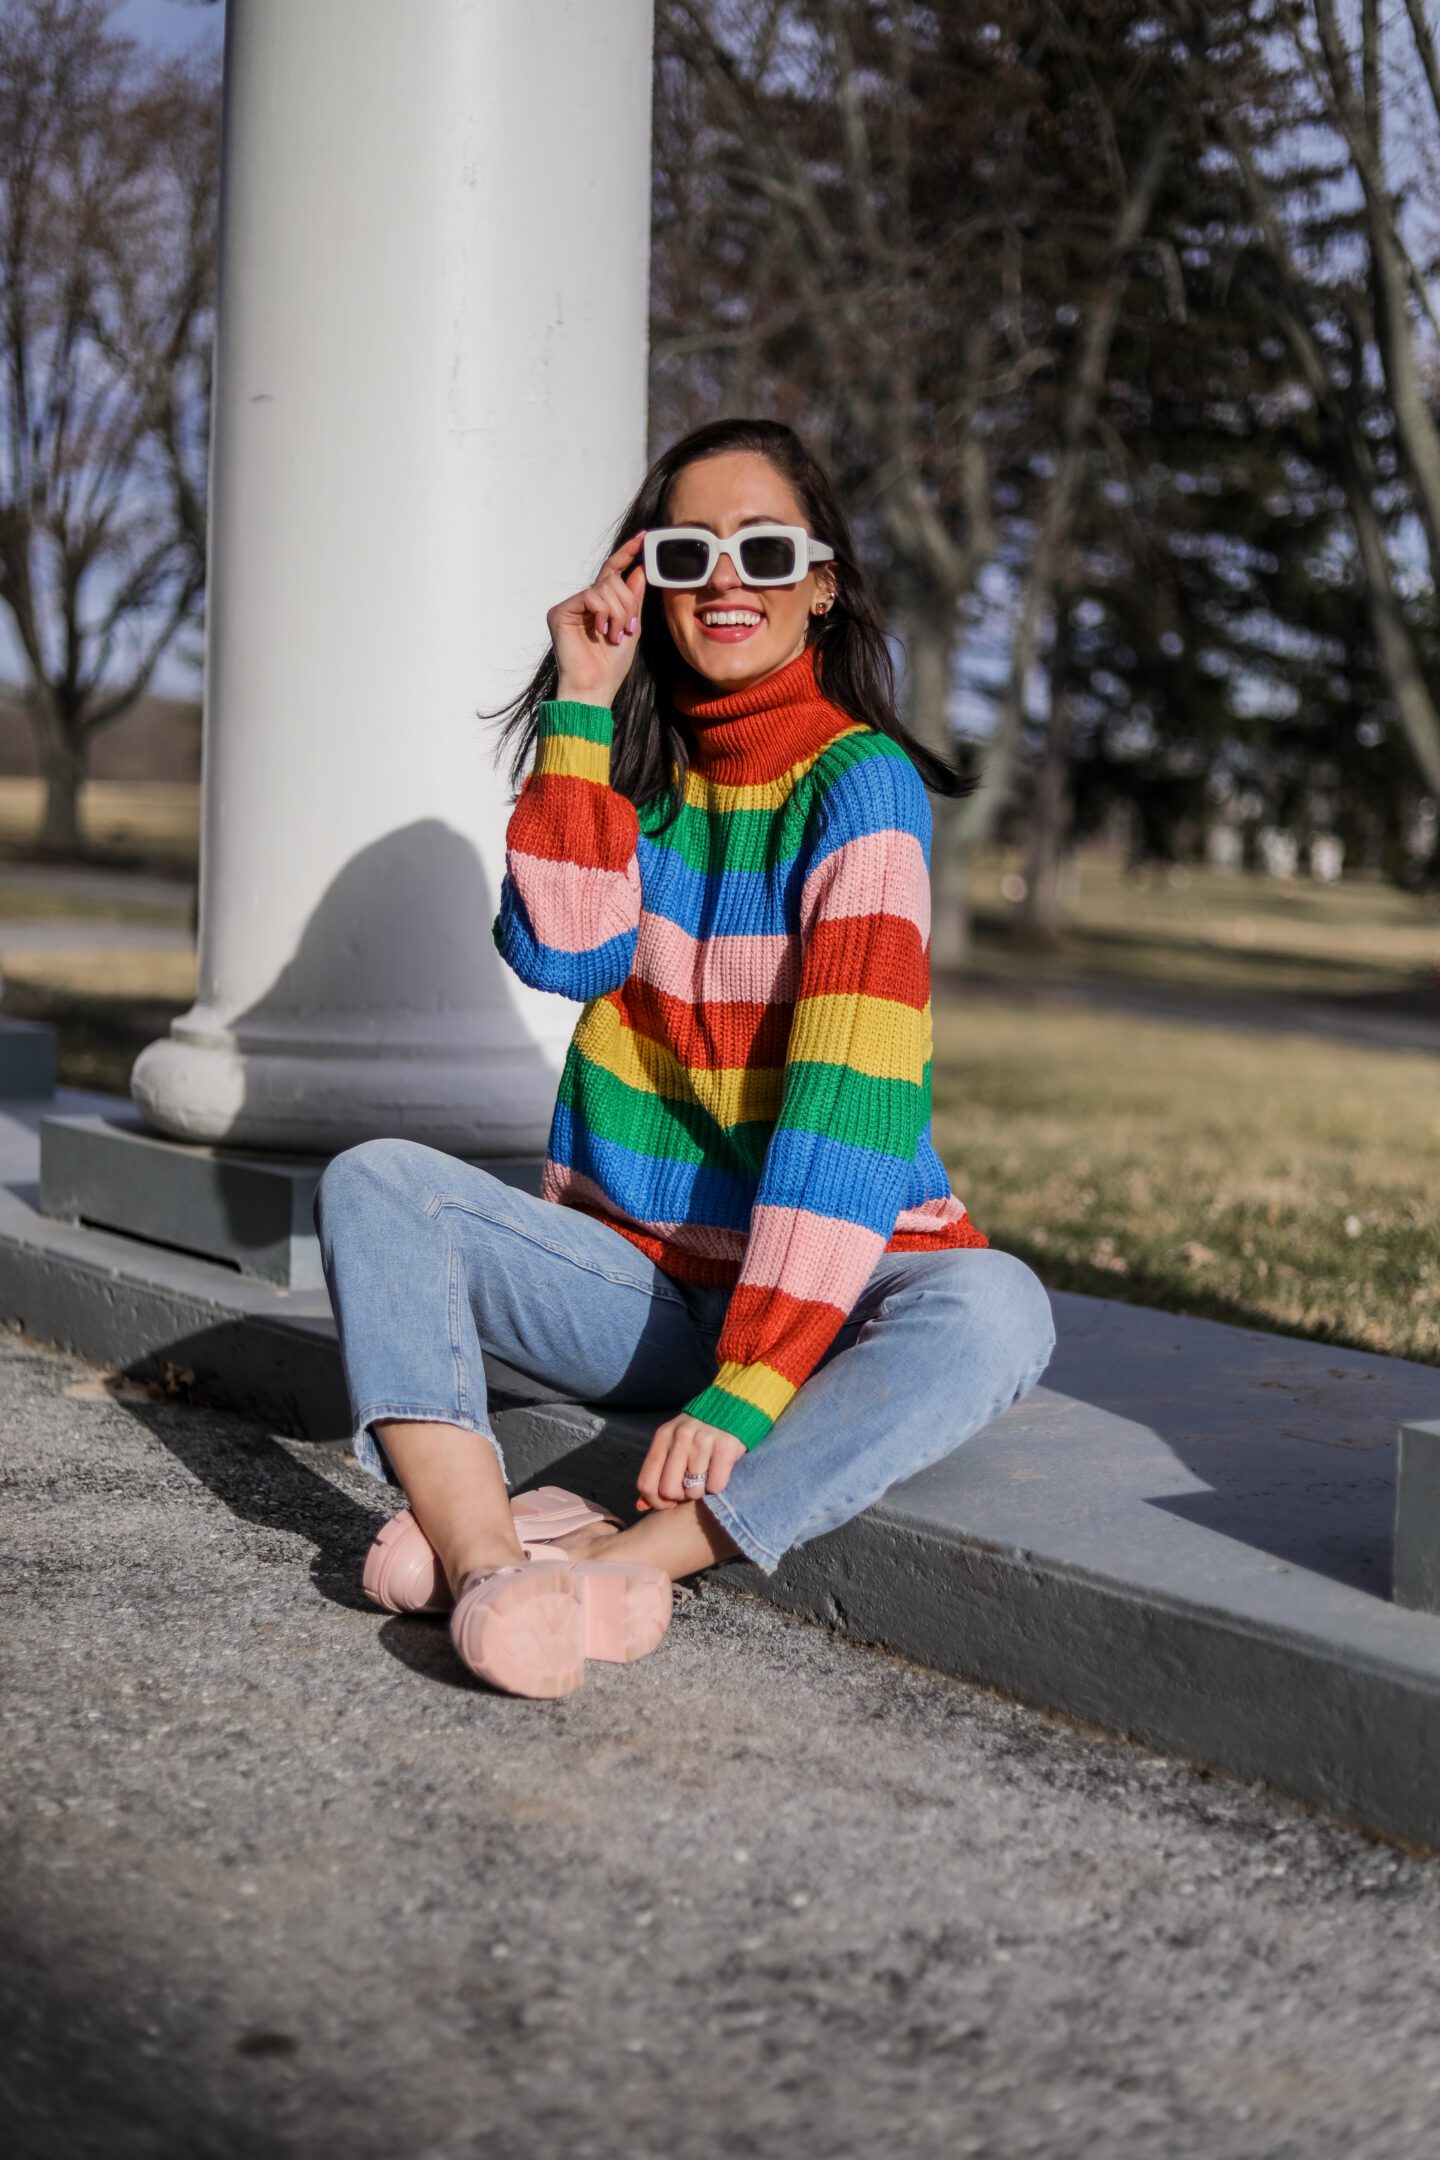 SPRING SWEATERS as the perfect transitional outfit between seasons - on Coming Up Roses